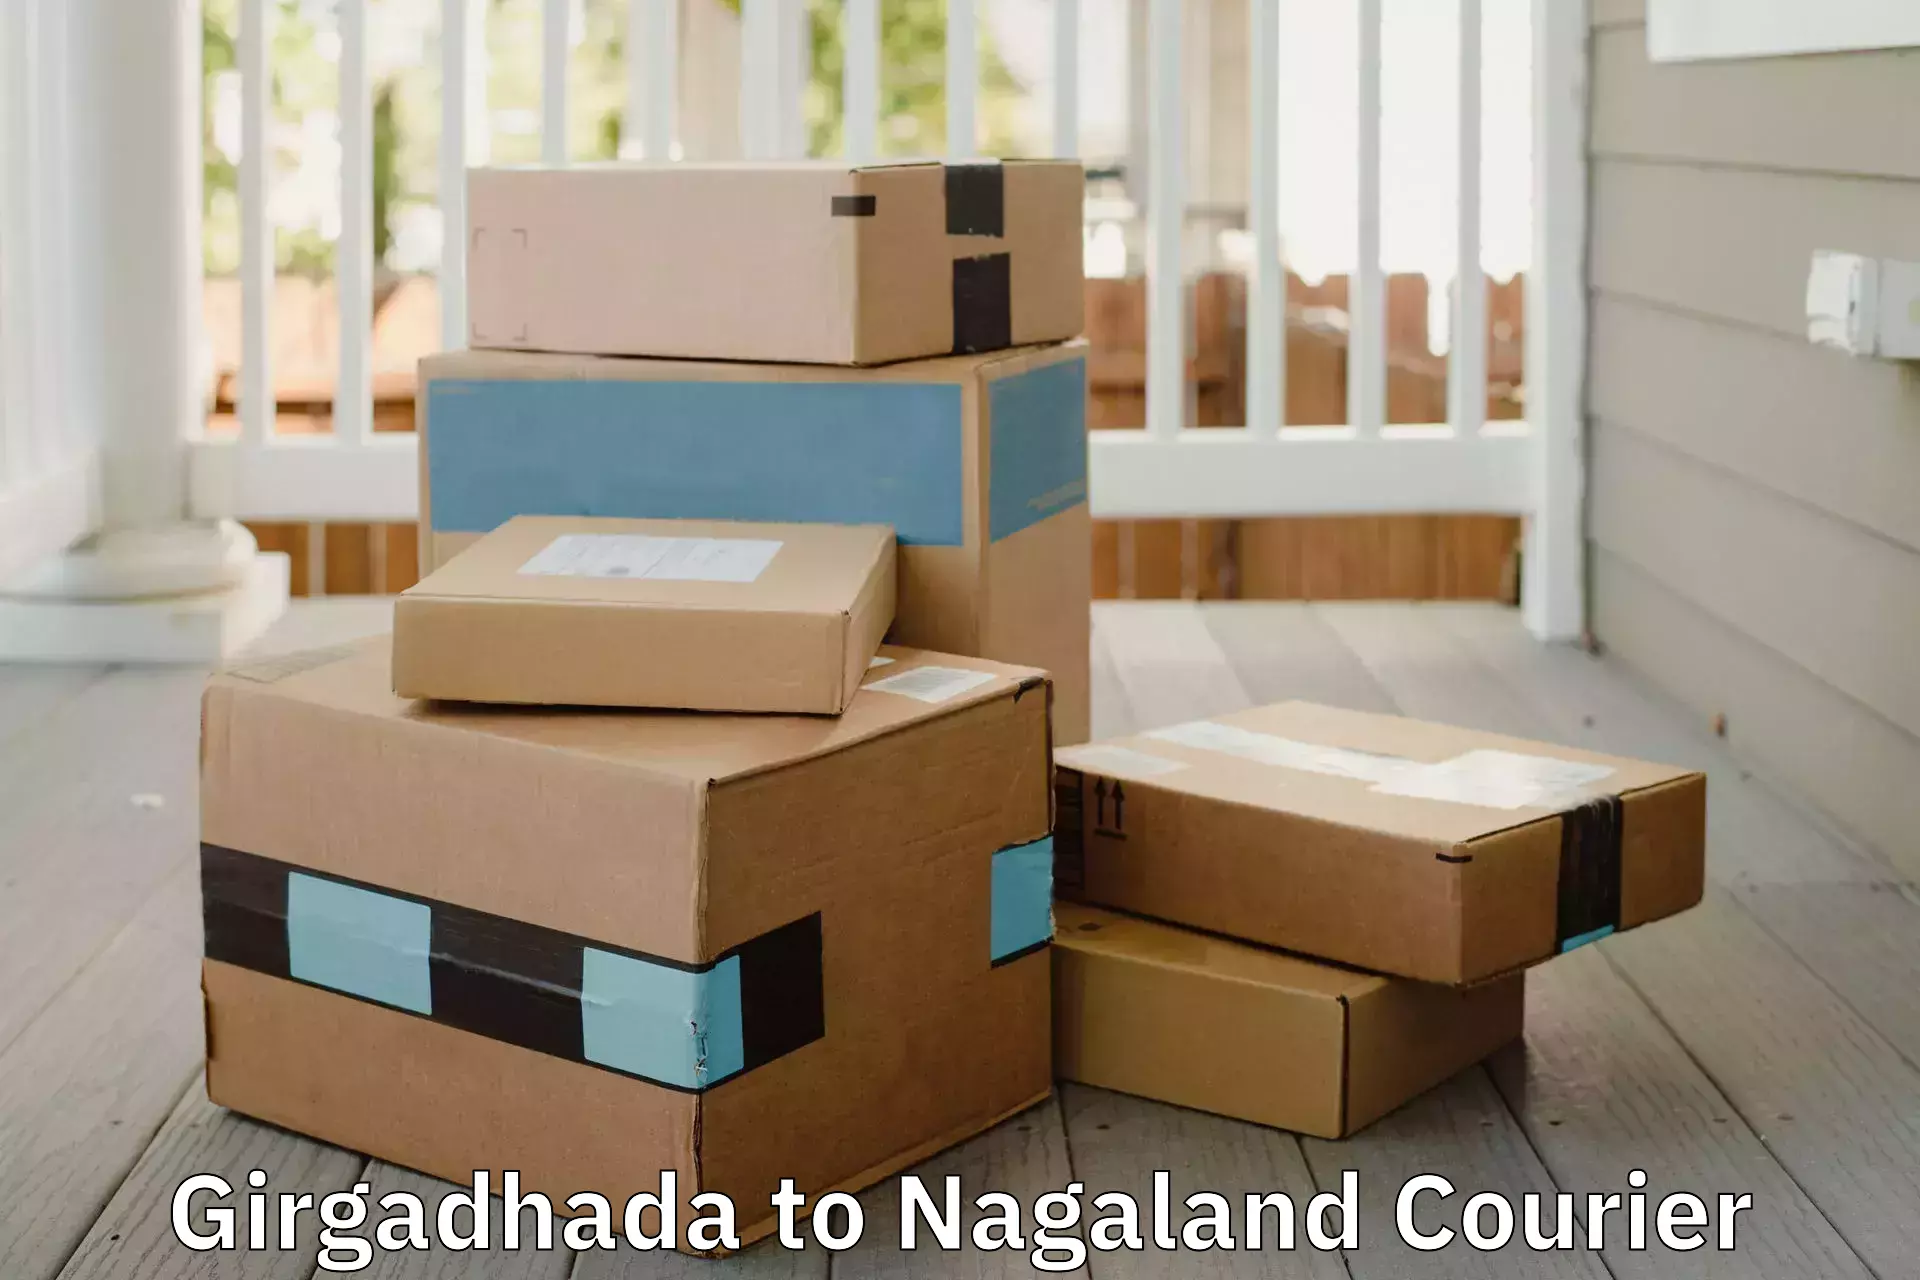 Customized moving experience in Girgadhada to Nagaland